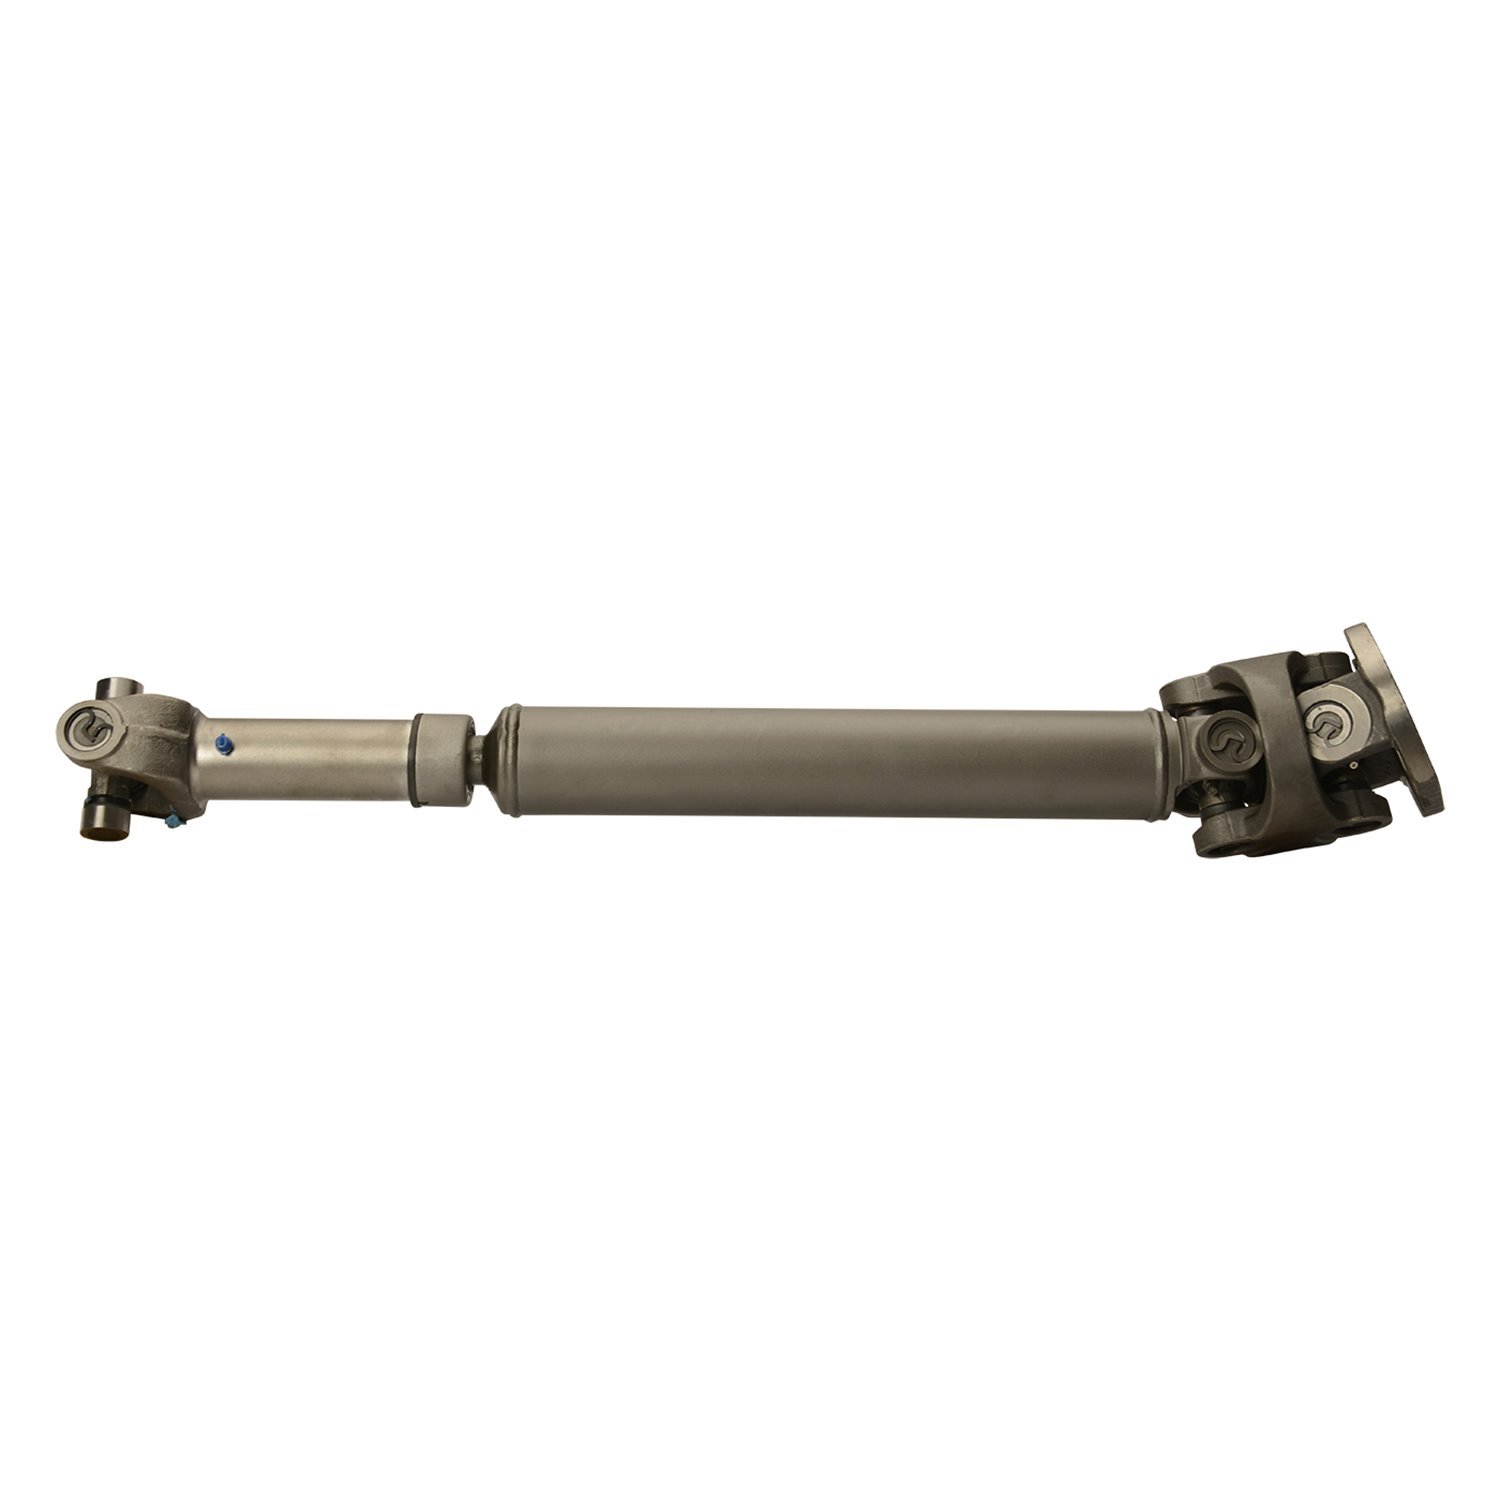 USA Standard ZDS9814 Front Driveshaft, For Ramcharger, Trailduster, Ram 1500 & 2500, 20 in. Weld-To-Weld